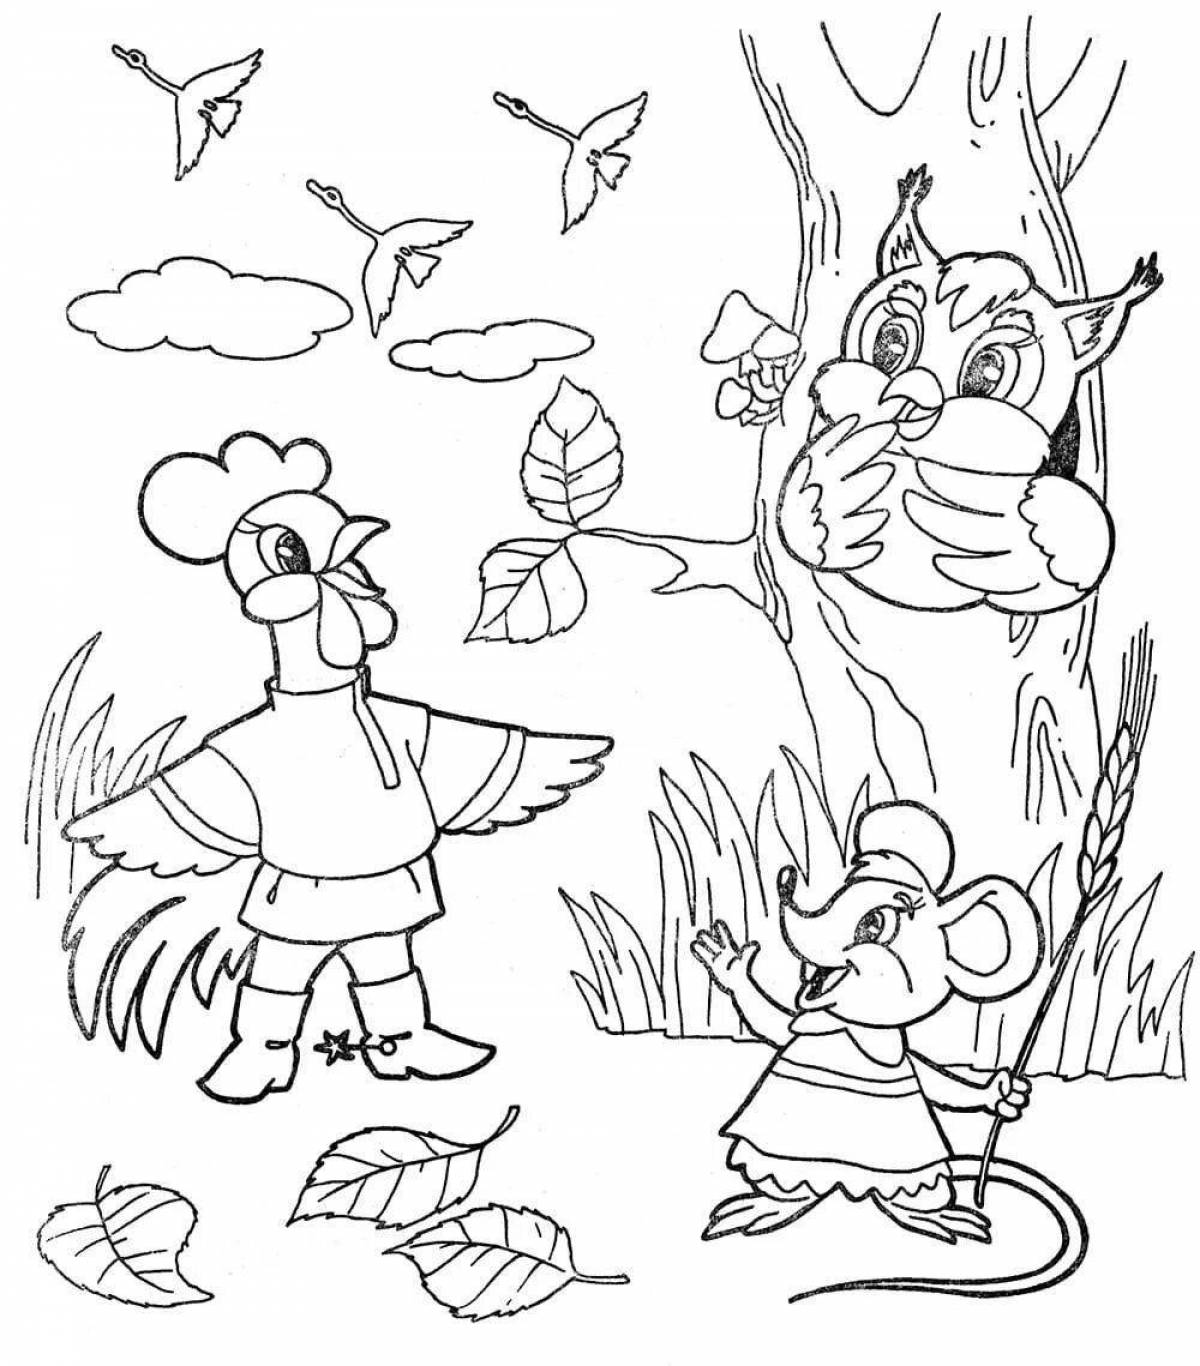 Relaxing coloring book for the elderly